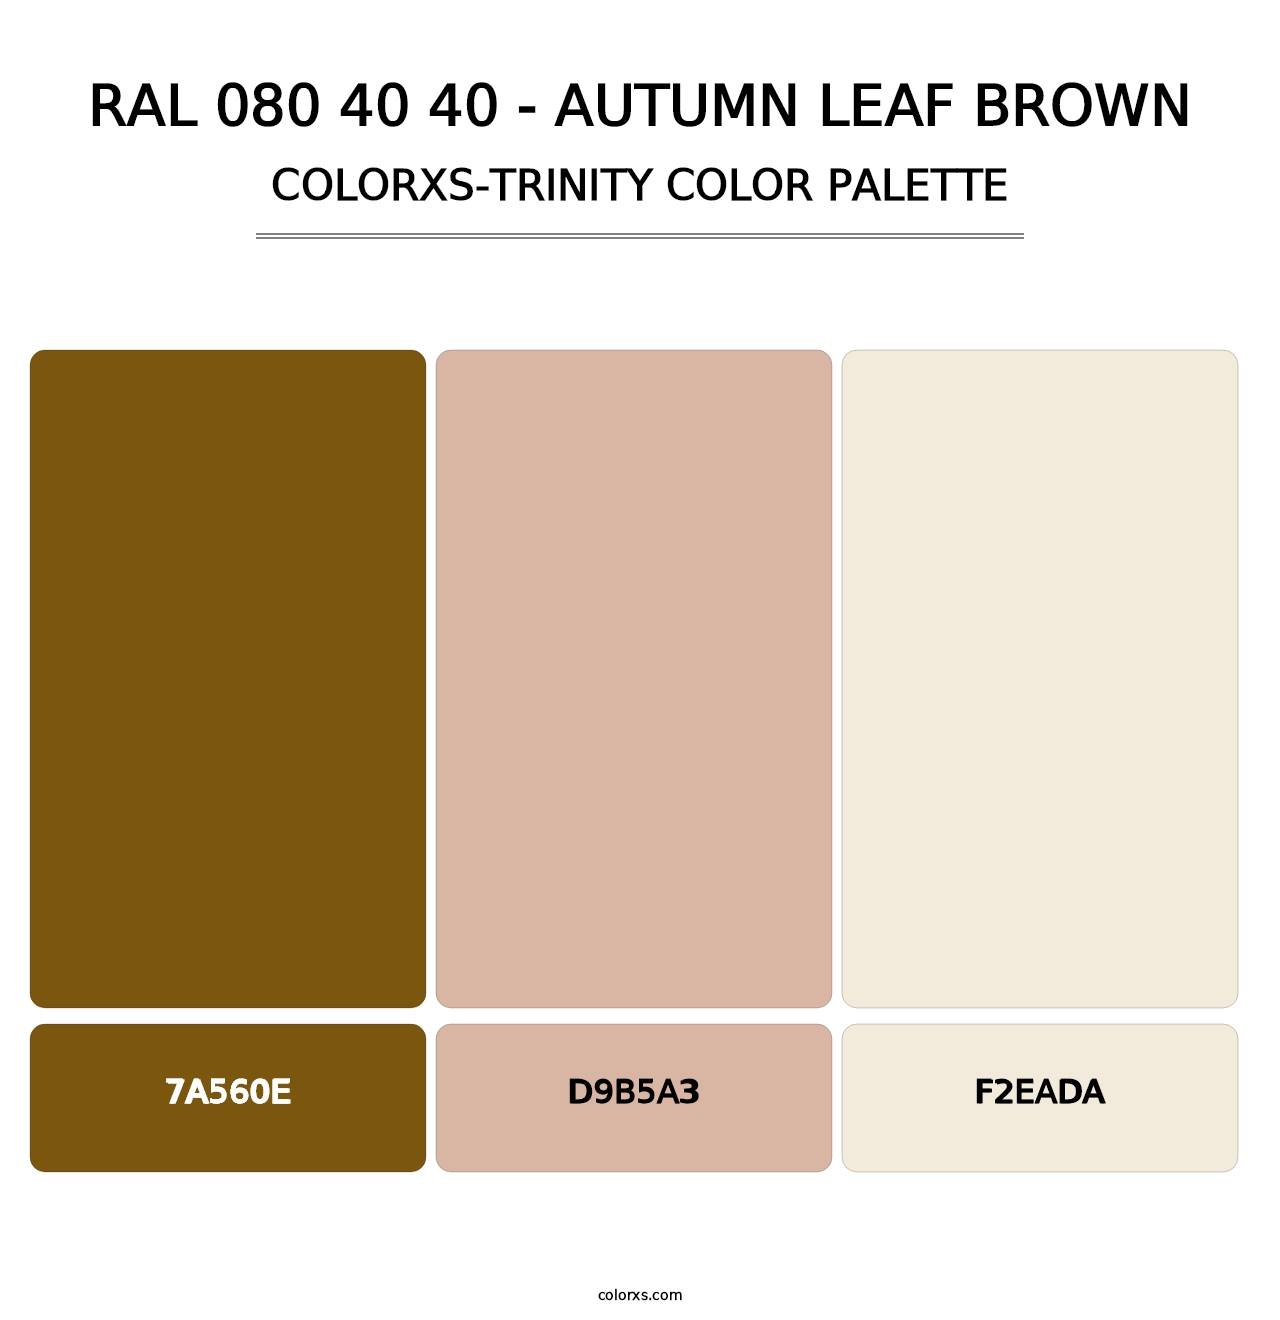 RAL 080 40 40 - Autumn Leaf Brown - Colorxs Trinity Palette